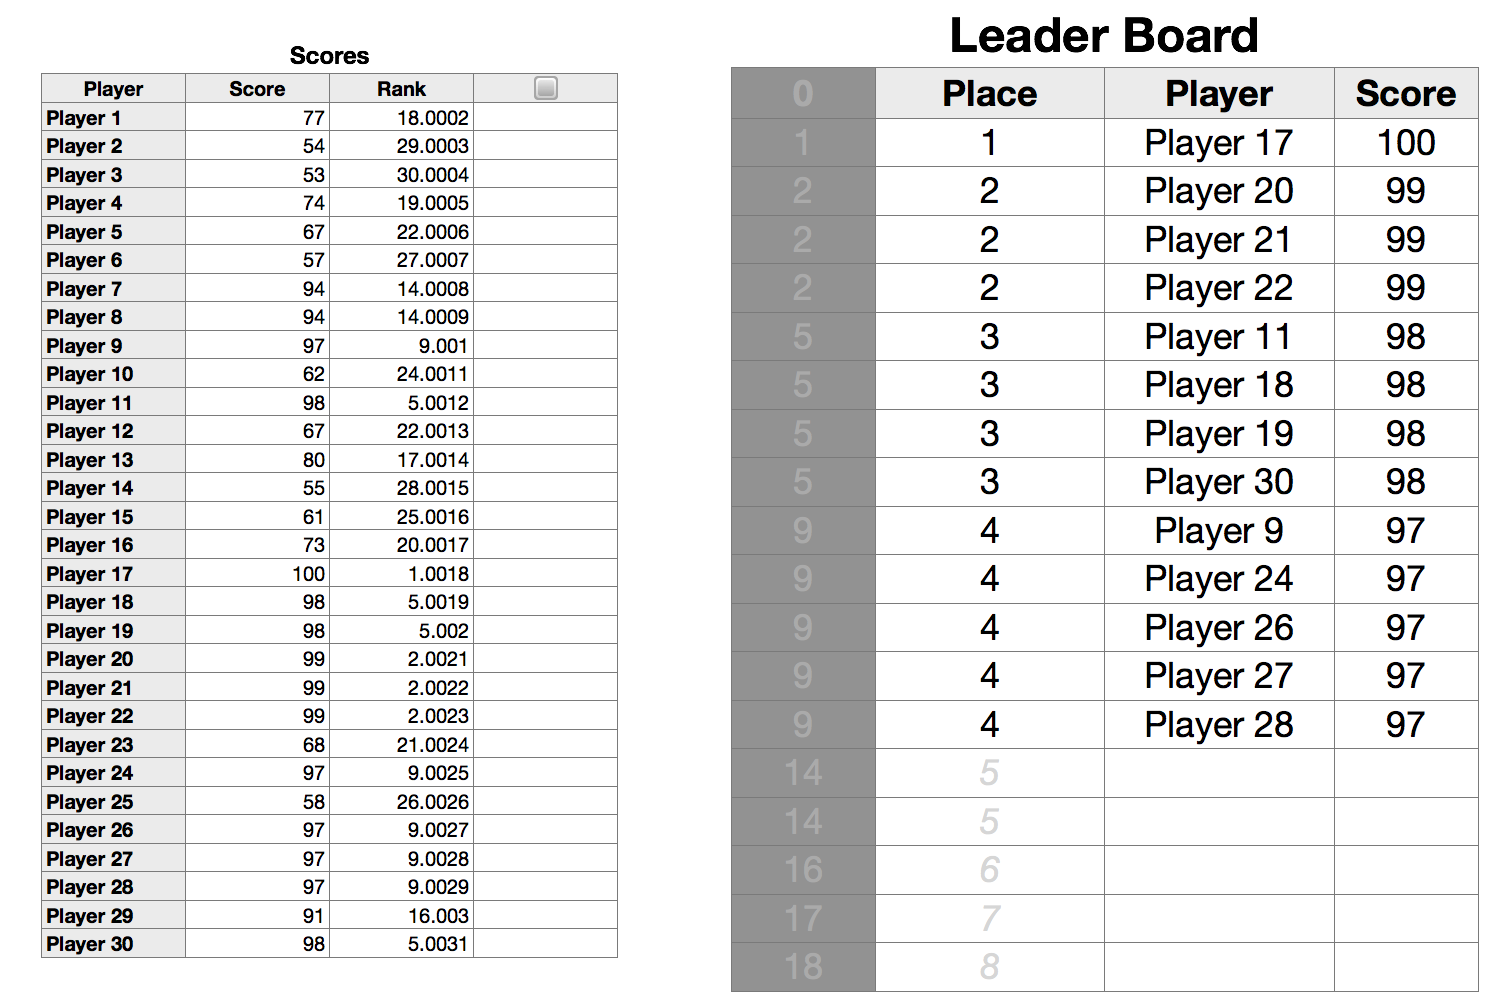 Building better leaderboards. Beyond the simple score list